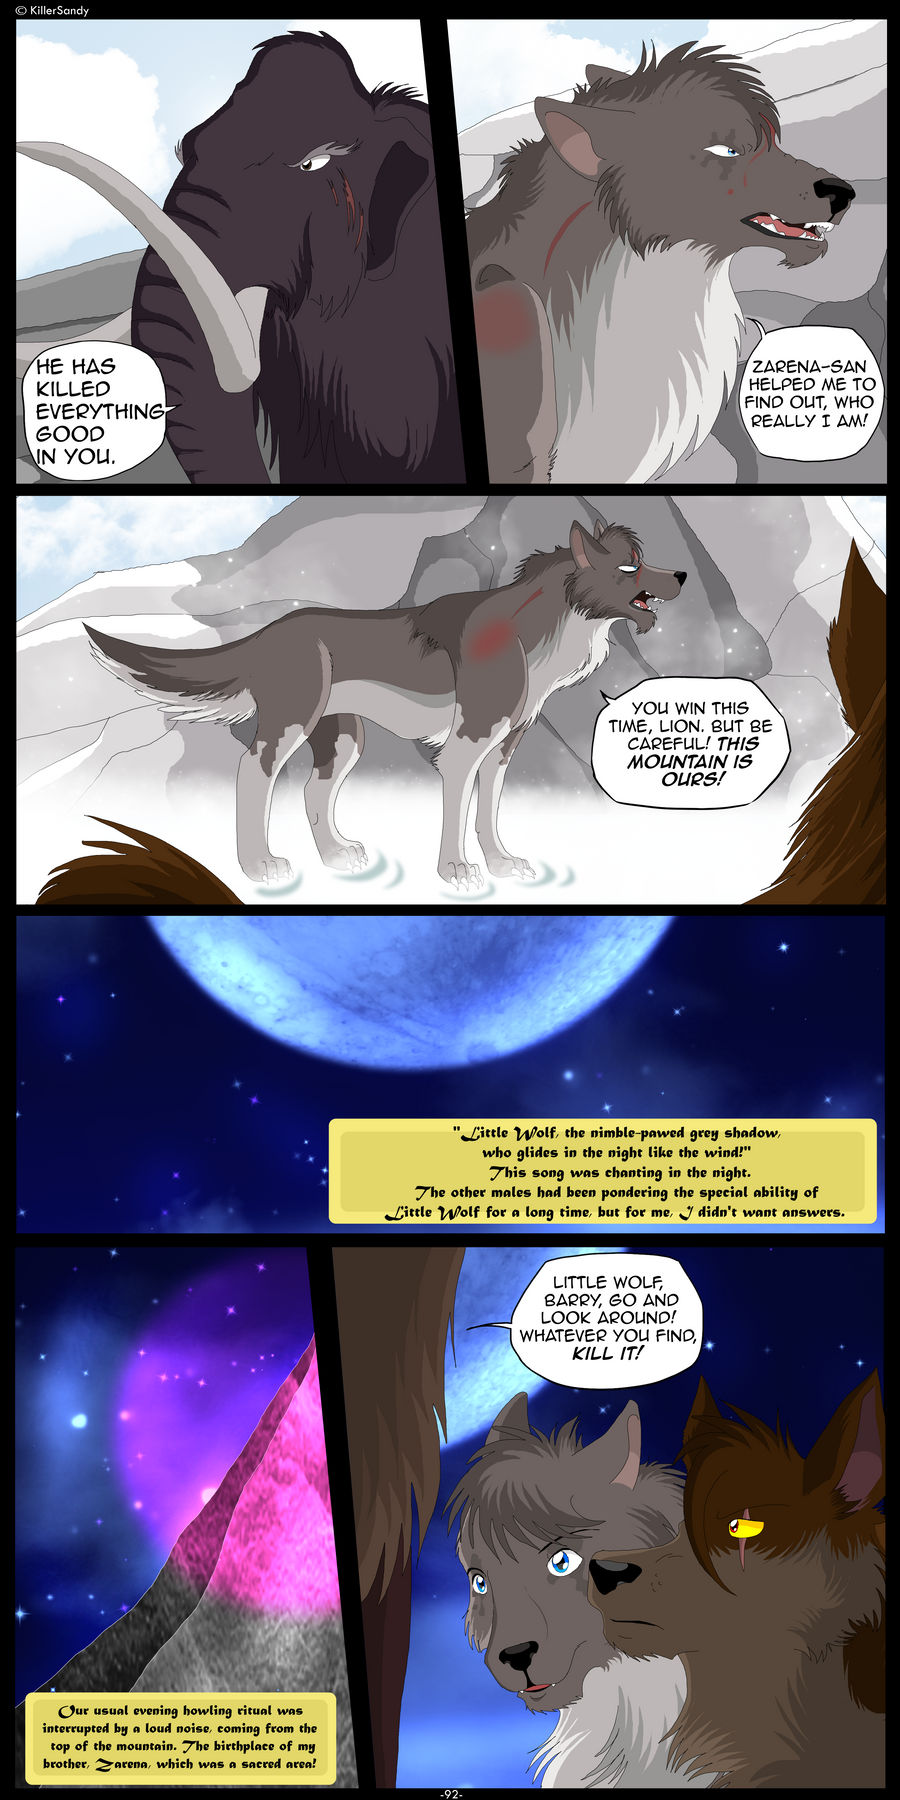 The Prince of the Moonlight Stone page 92